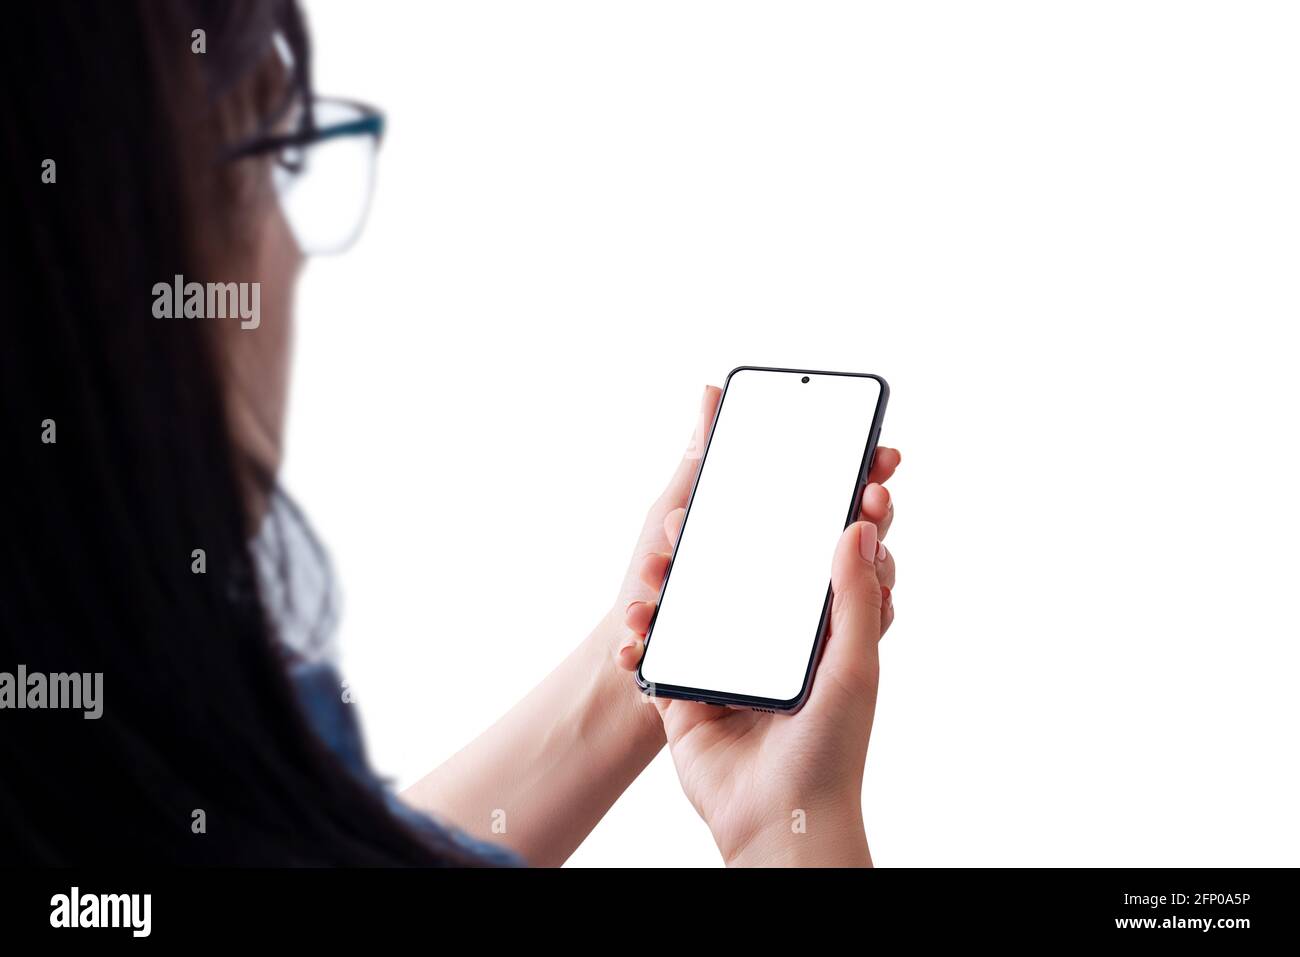 Woman holding smart phone with isolated screen for mockup, app interface presentation. Over the shoulder view Stock Photo